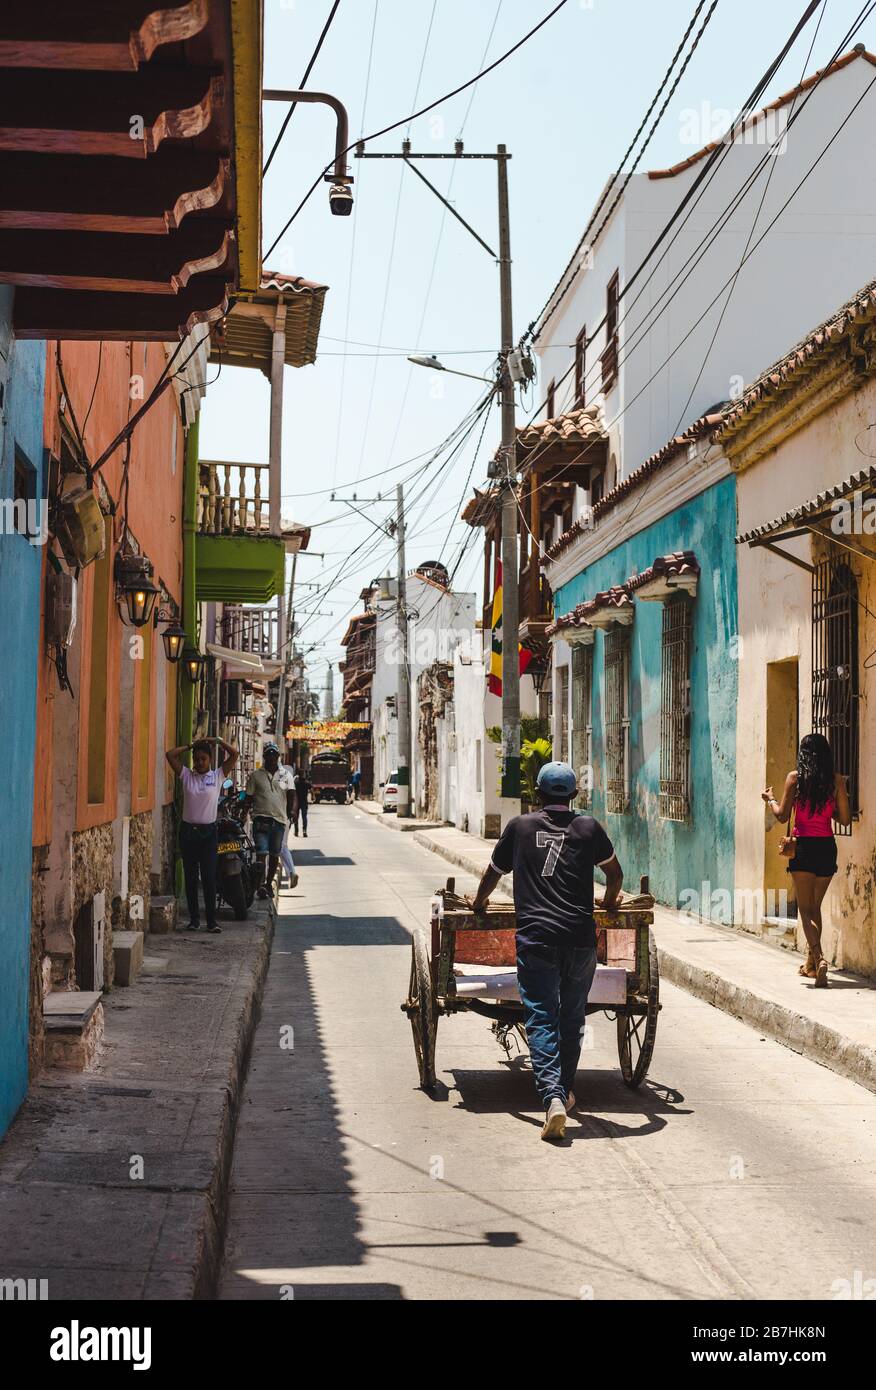 Working man pushing wooden cart of produce down a colorful narrow street in downtown Getsemani, Cartagena Stock Photo